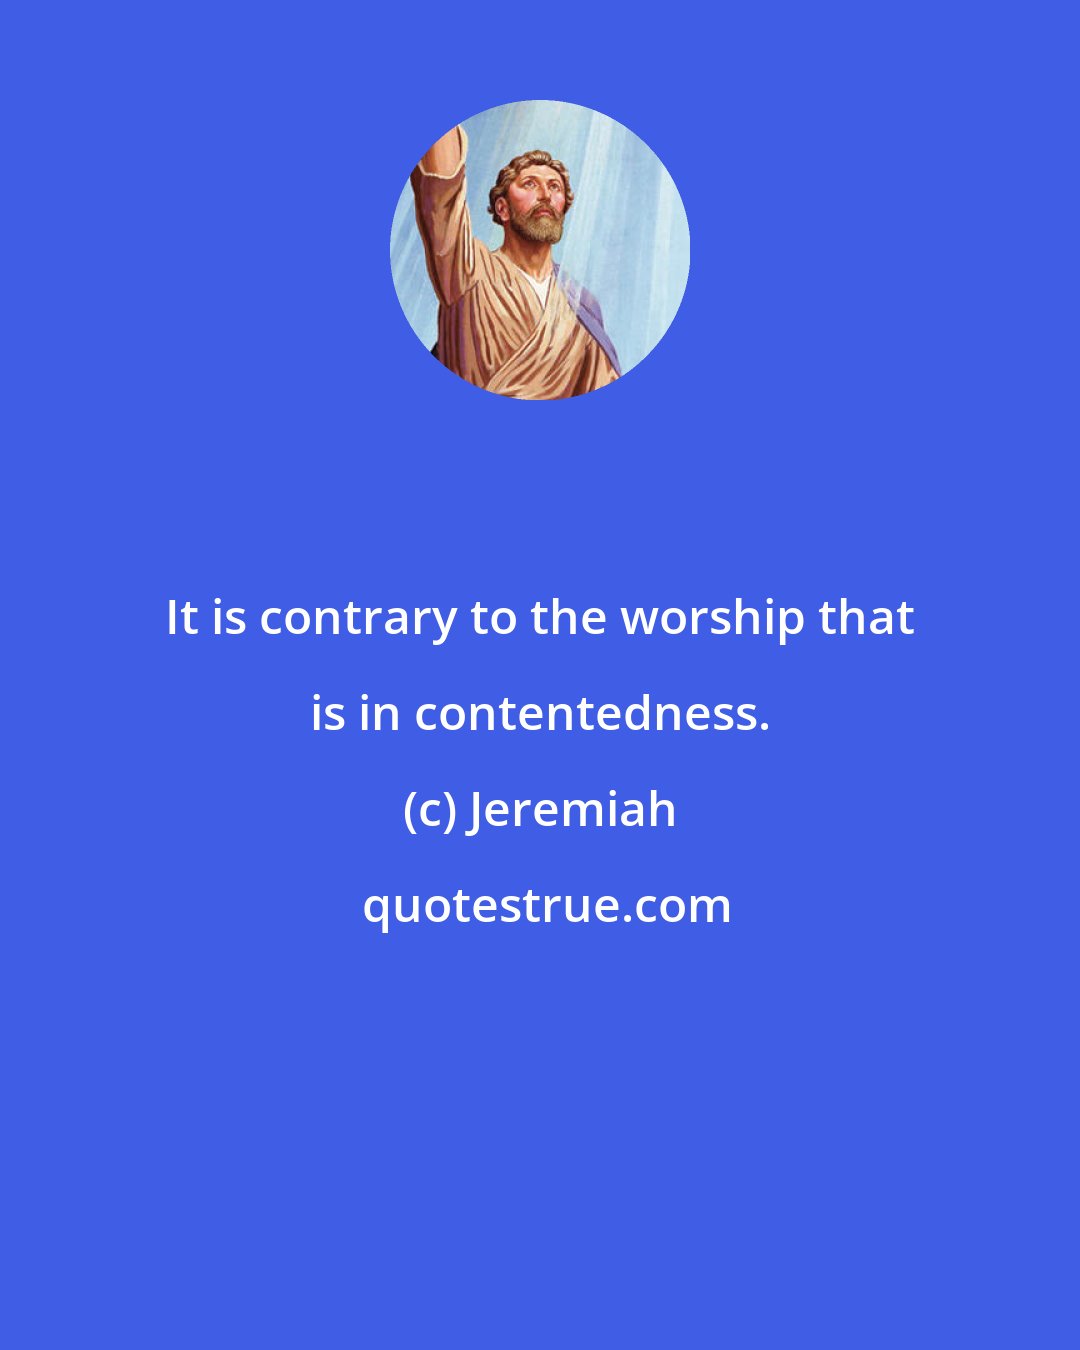 Jeremiah: It is contrary to the worship that is in contentedness.